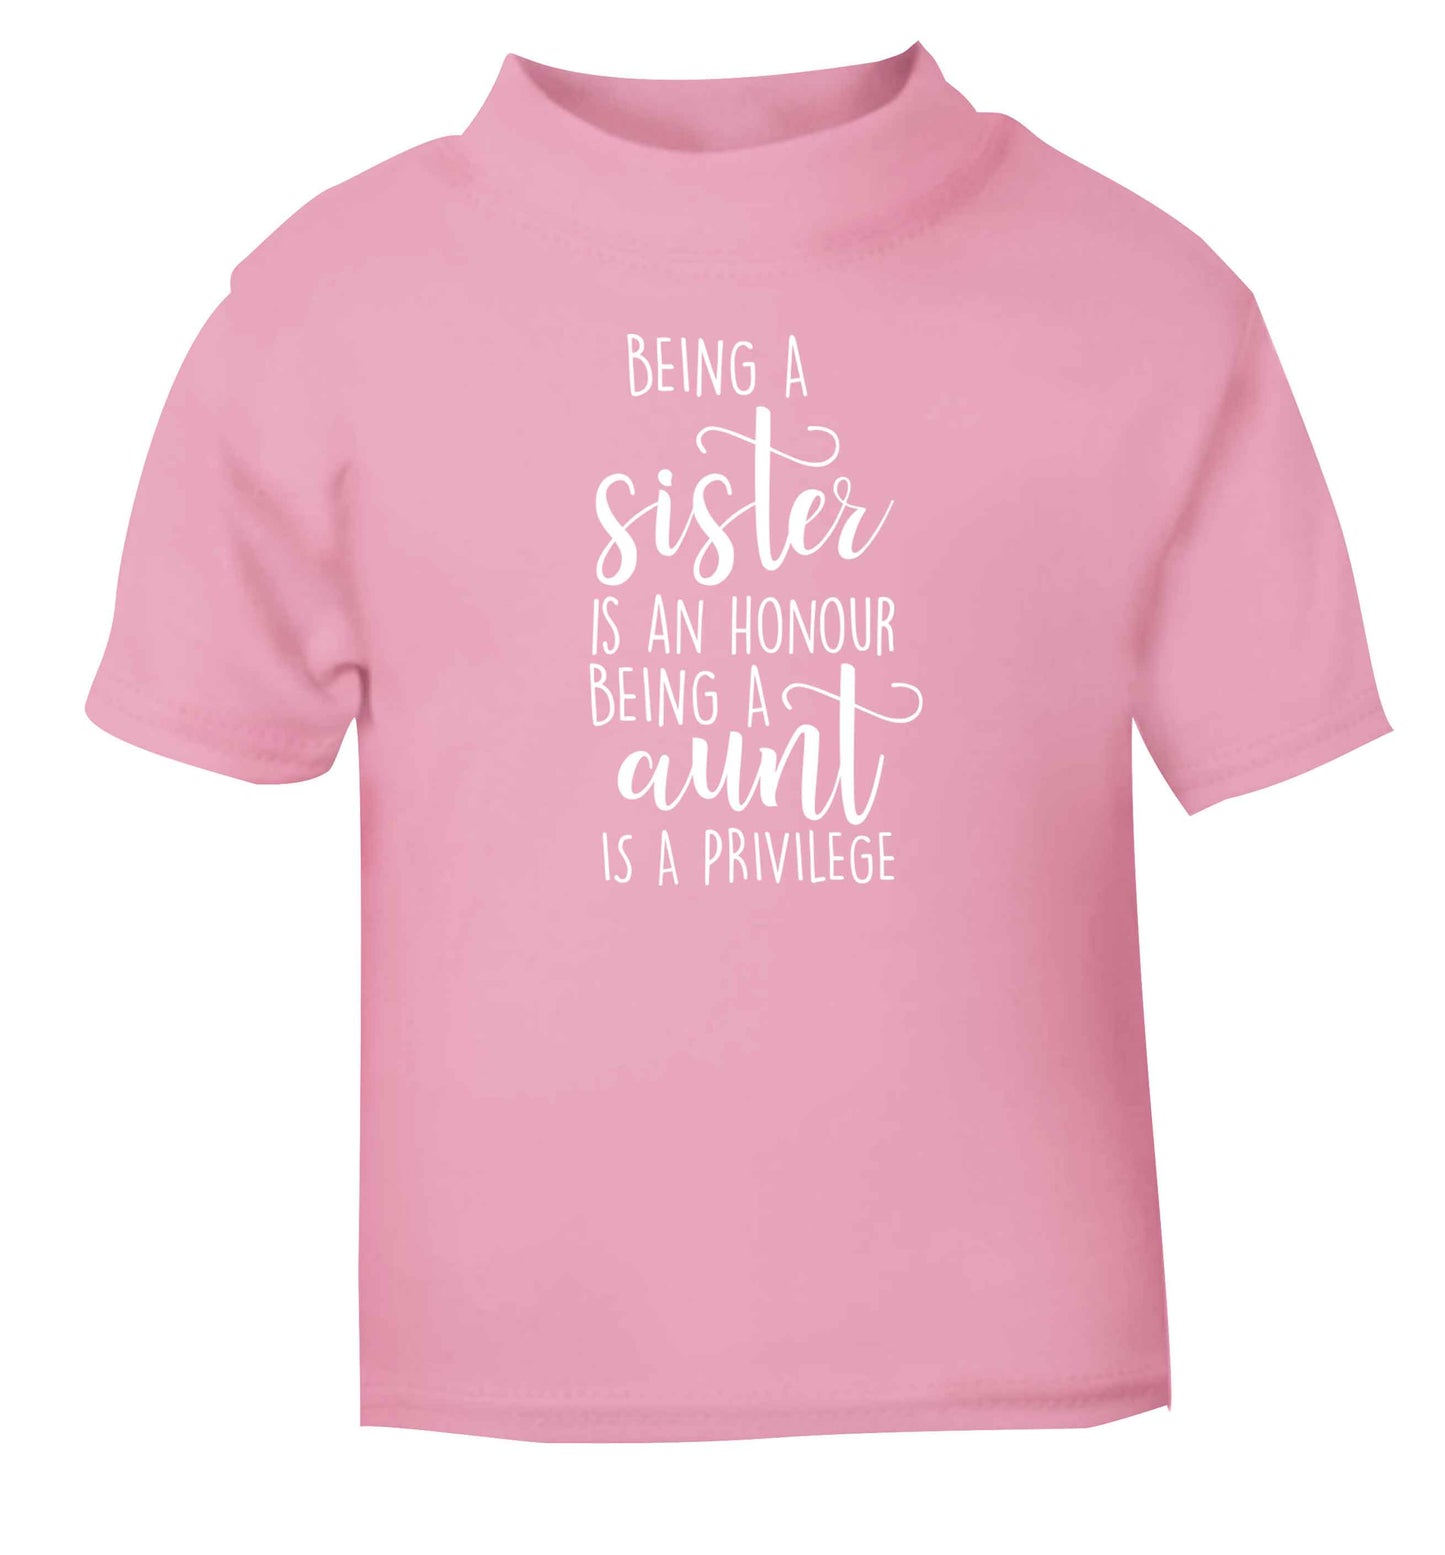 Being a sister is an honour being an auntie is a privilege light pink Baby Toddler Tshirt 2 Years